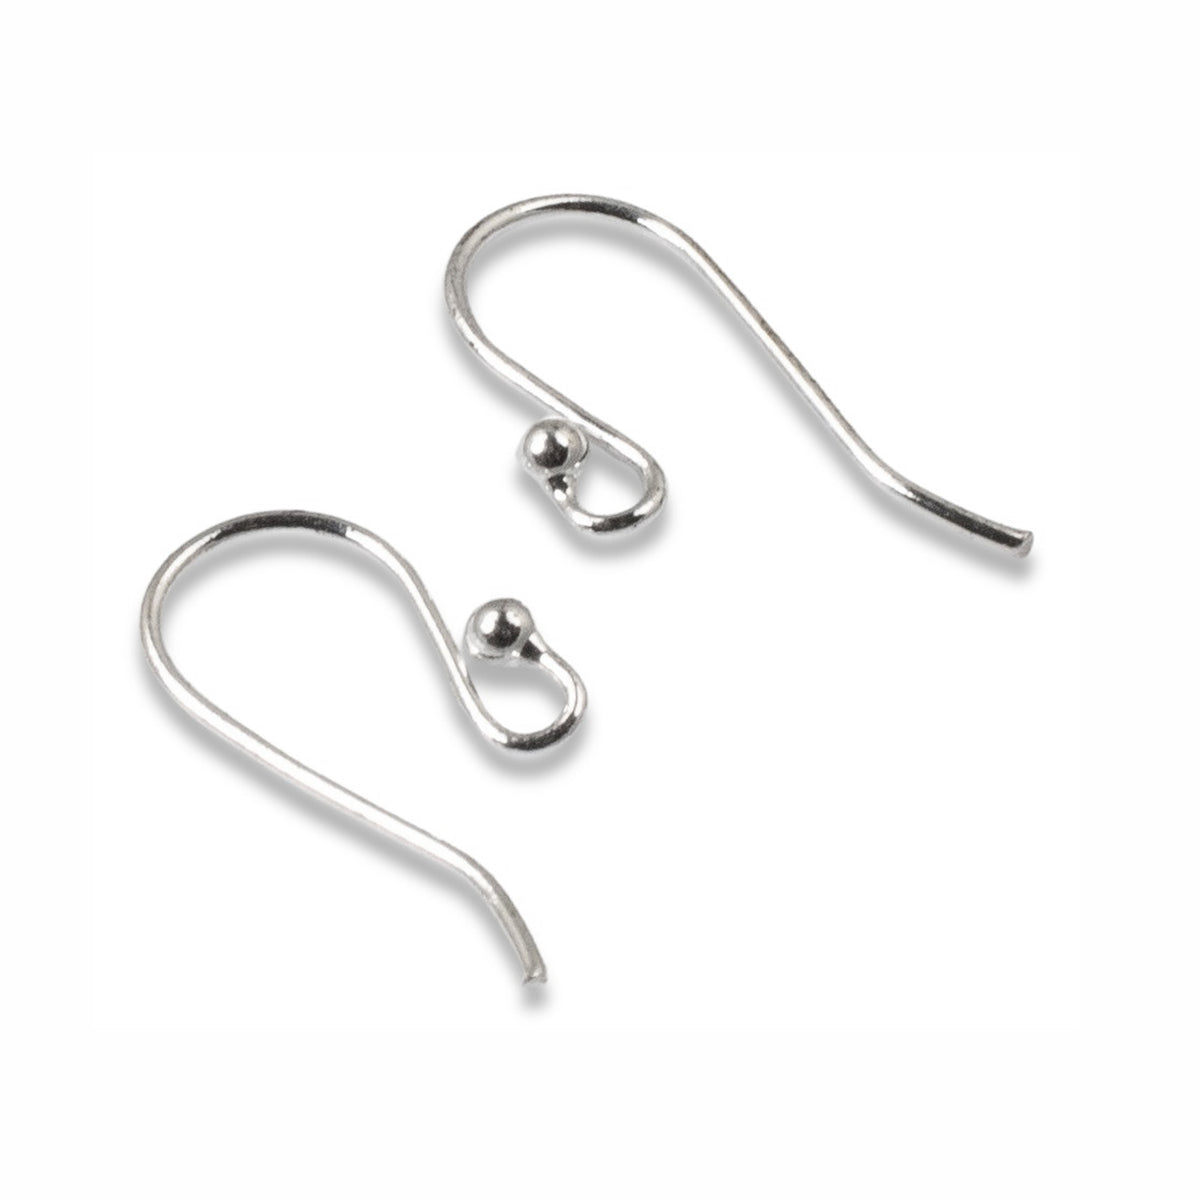 Plain Fish Hook Earwire with Ball, Silver-Plated (36 Pieces)